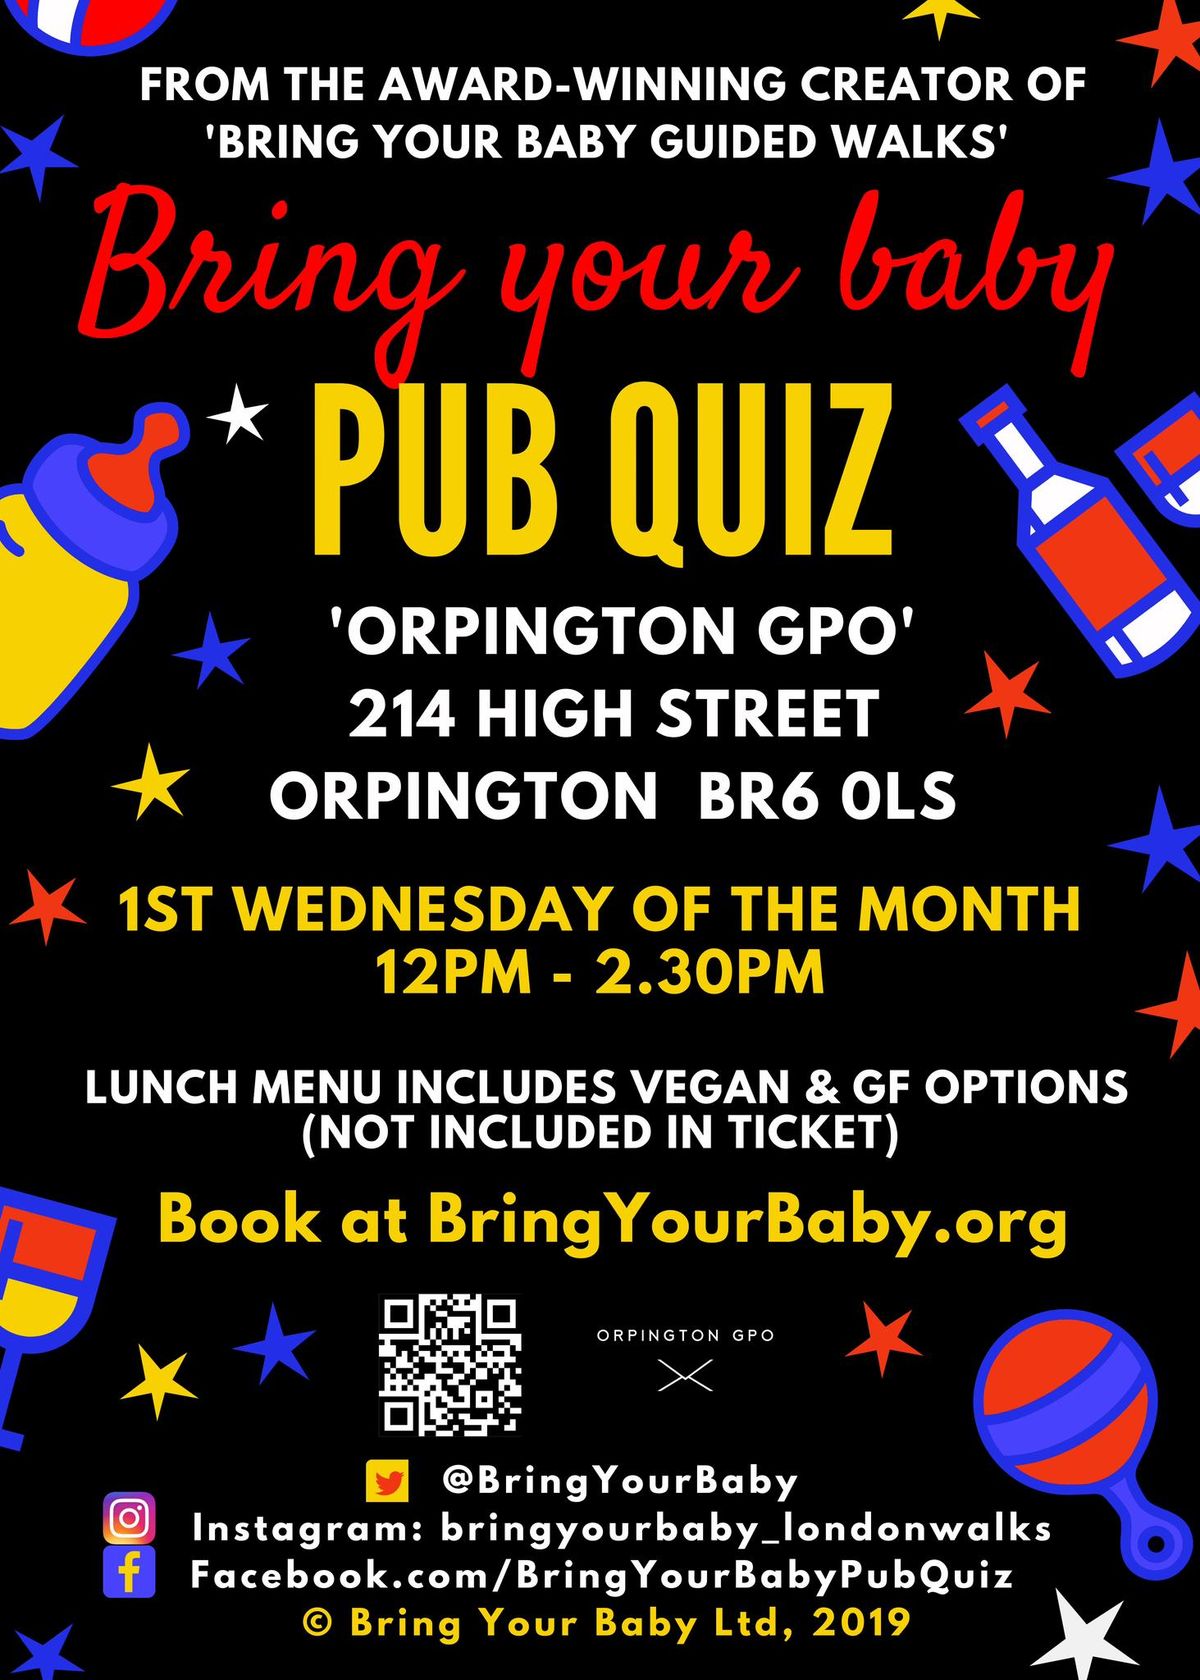 BRING YOUR BABY PUB QUIZ @ ORPINGTON GPO near BEXLEY, SIDCUP, BROMLEY, WELLING, CHISLEHURST, SWANLEY